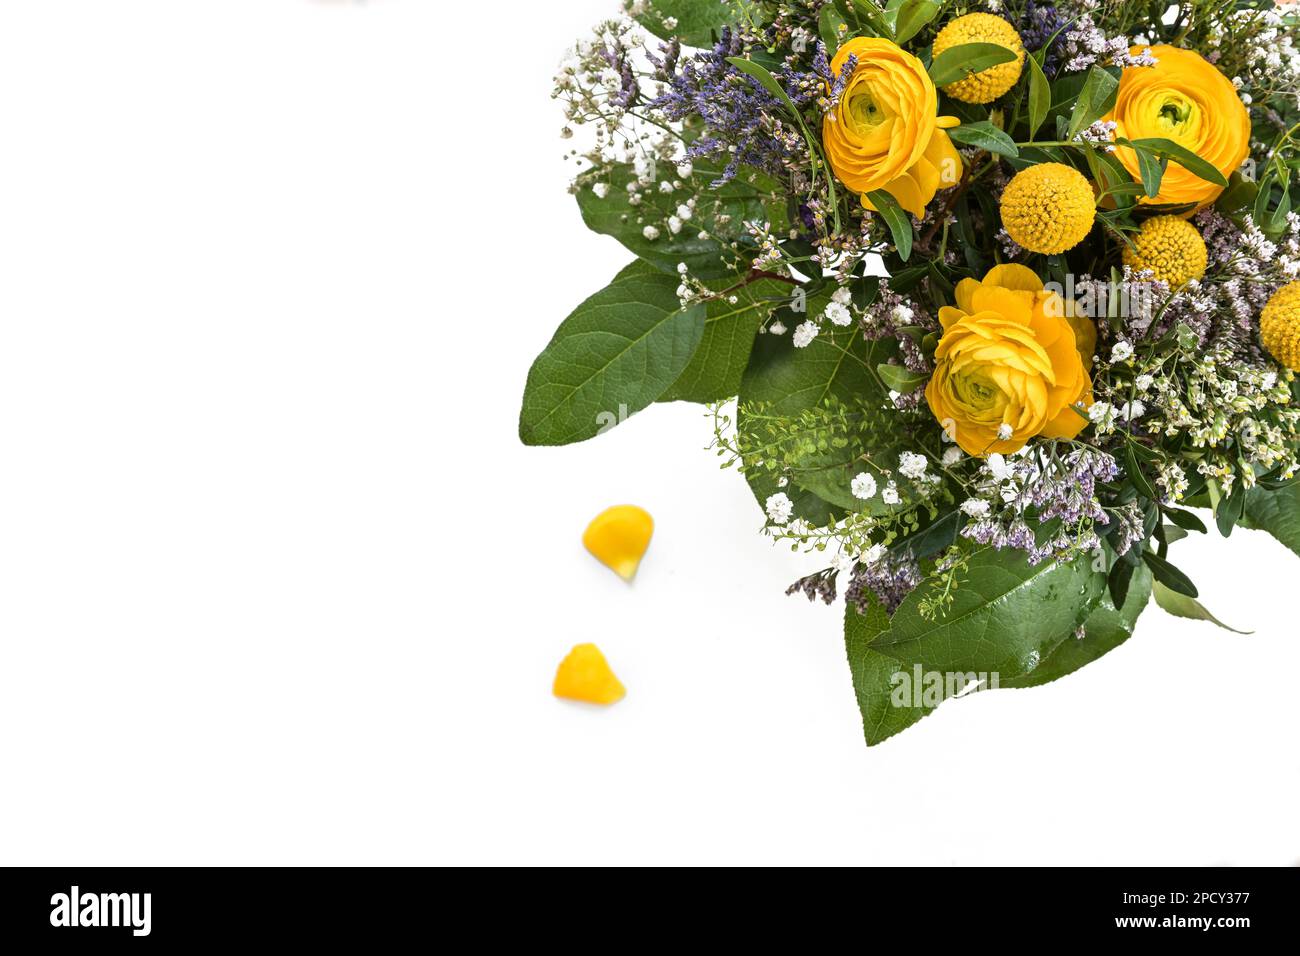 Spring flower bouquet in yellow, blue and green seen from above as a corner background isolated on a white background with large copy space, useful as Stock Photo